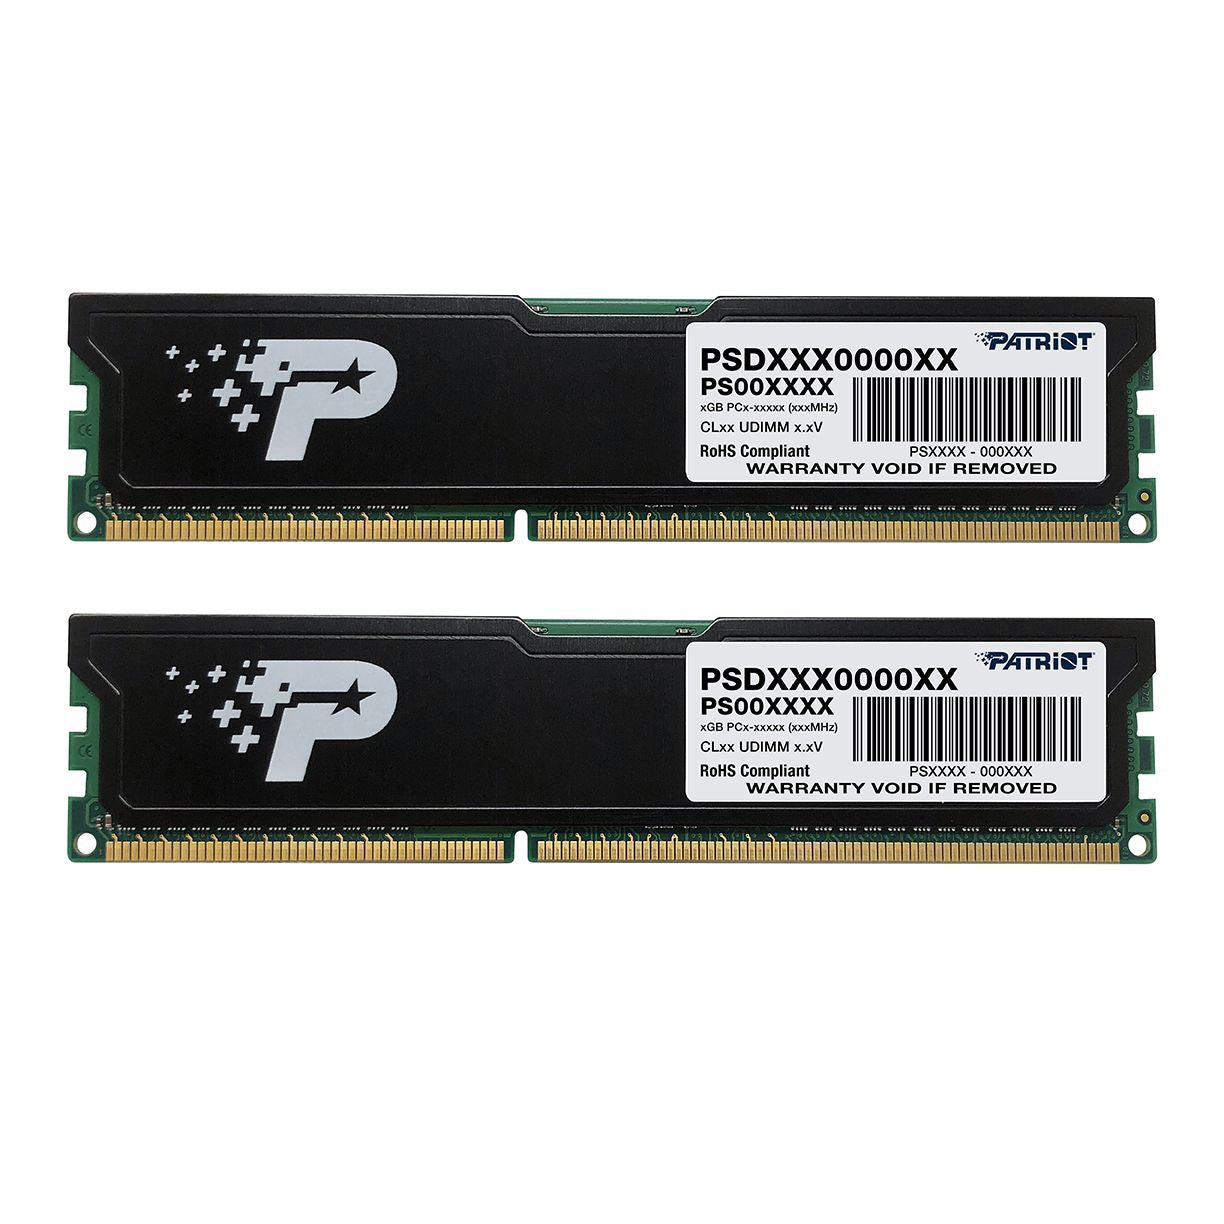 Patriot Signature Series - DDR3 UDIMM PC3-12800 (1600MHz) CL11_Dual Kit with heatshield